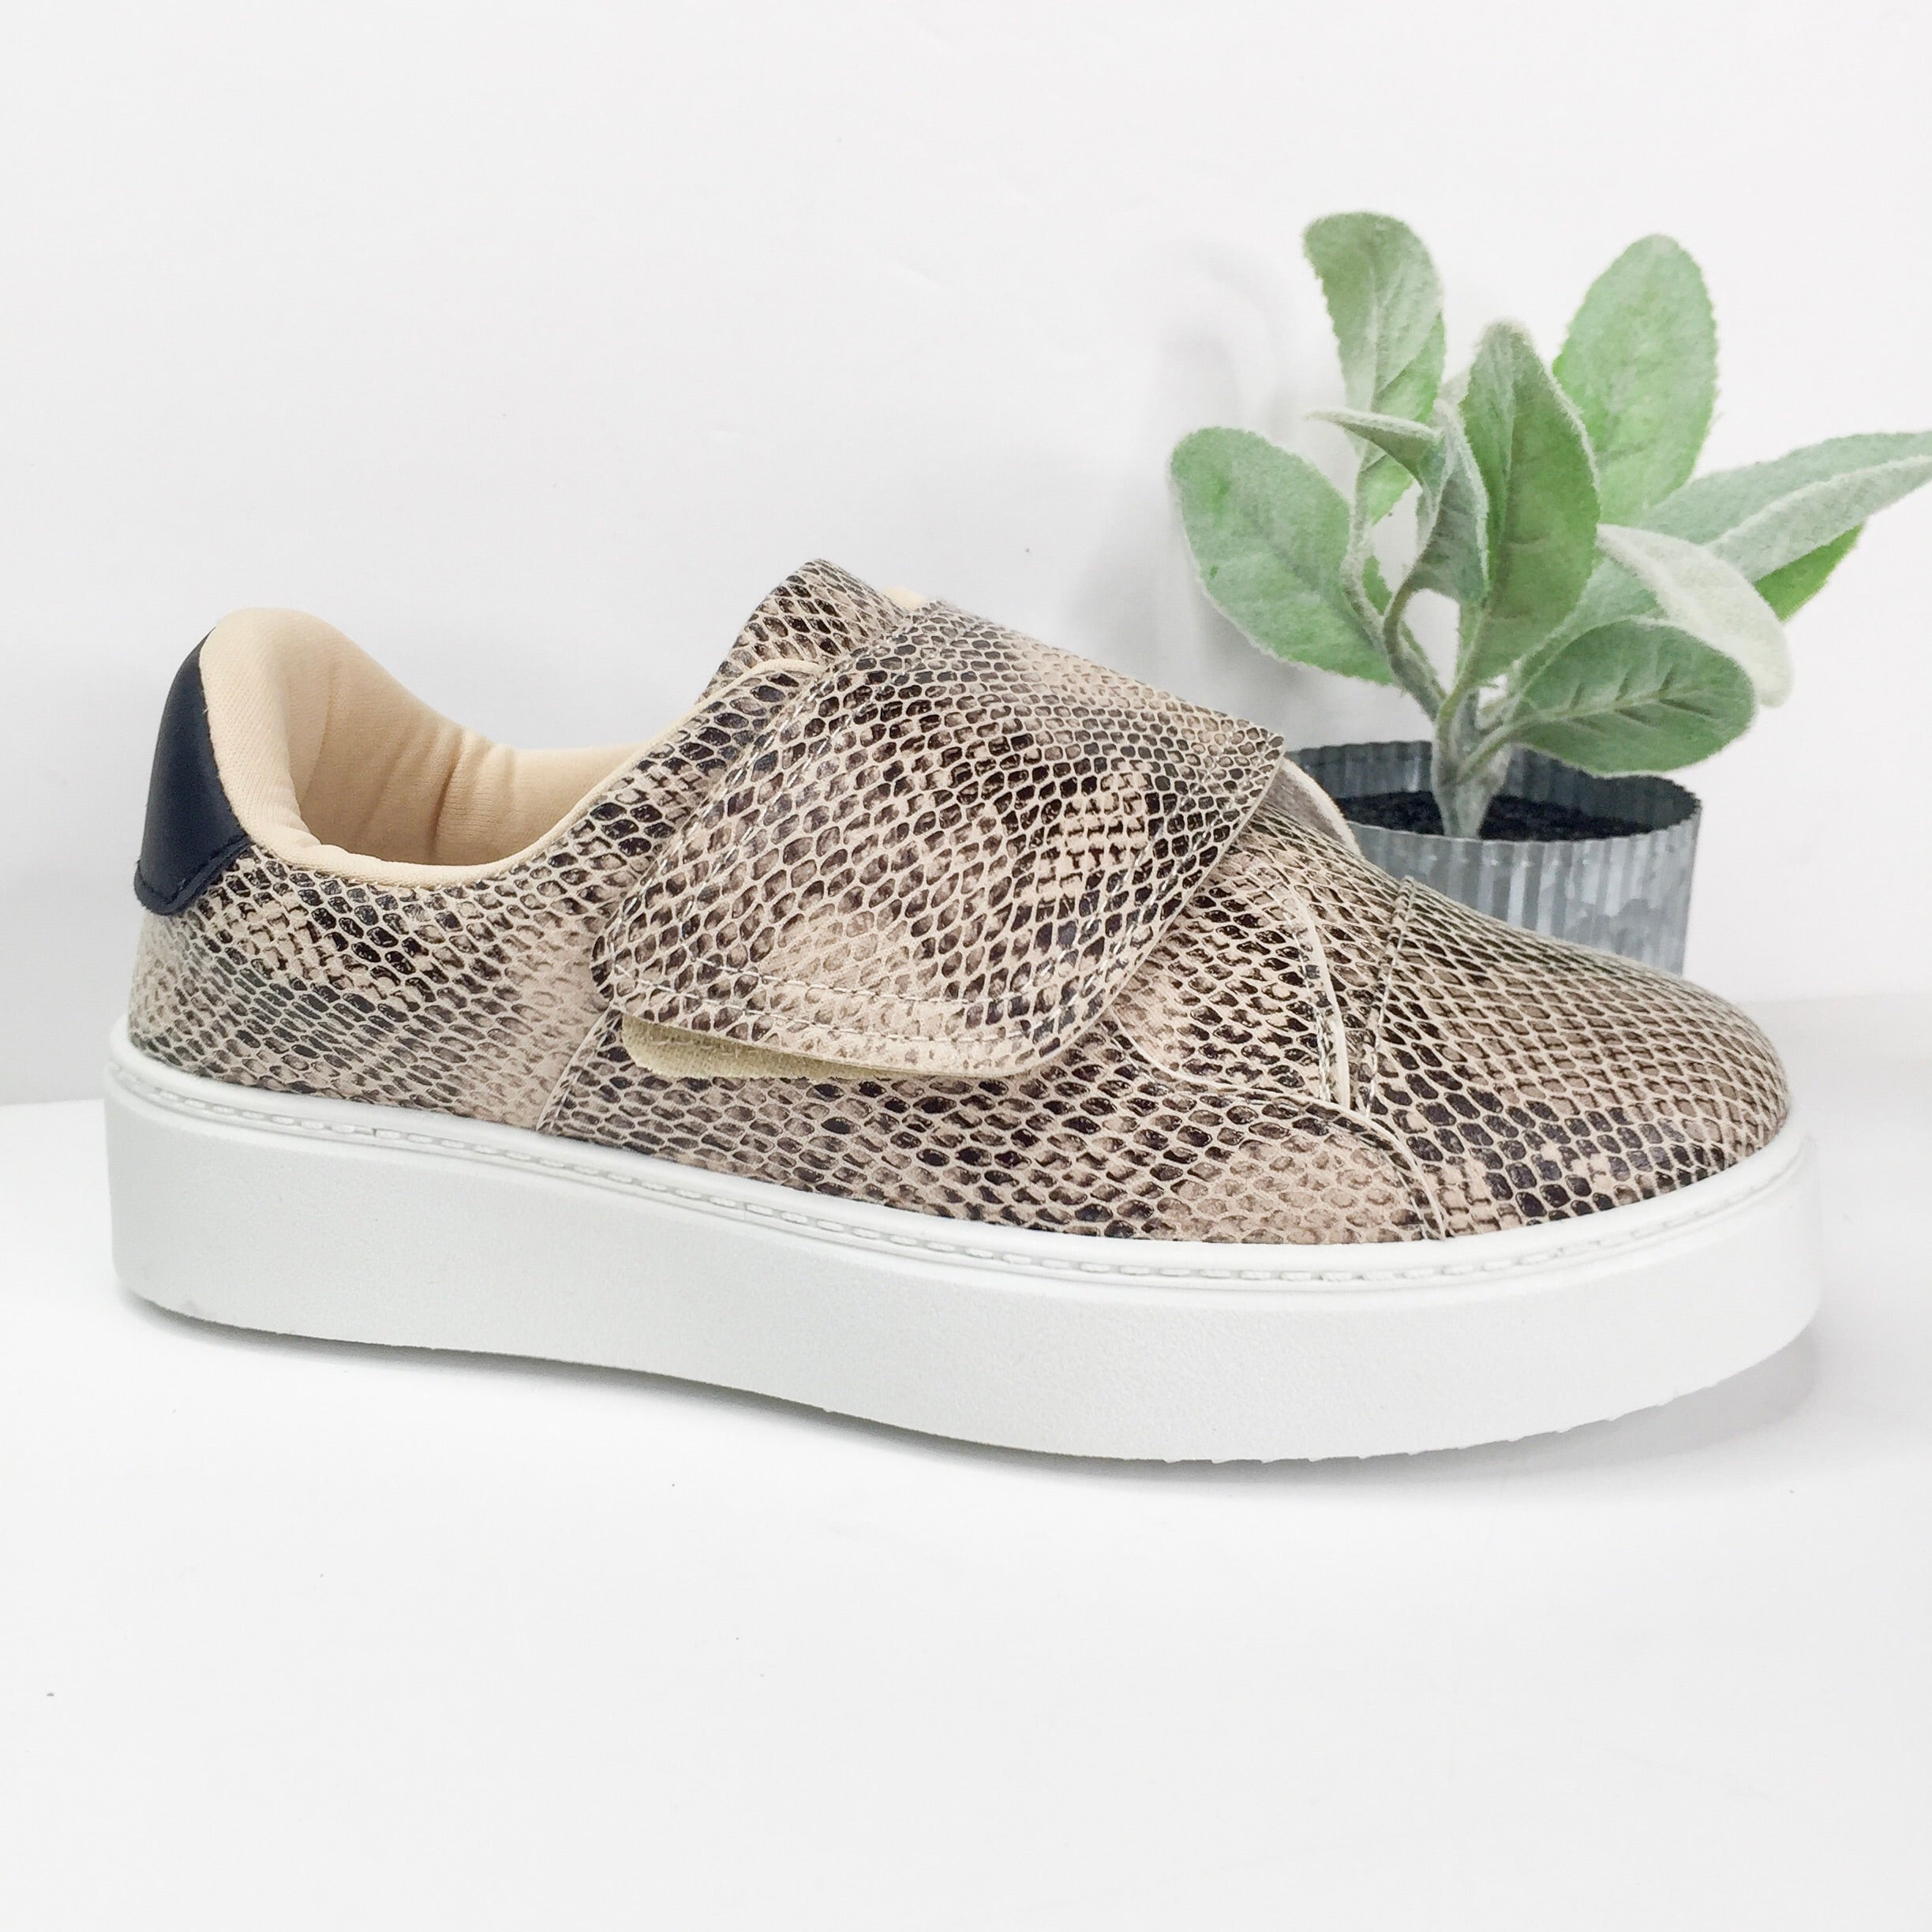 Last Chance Size 6 & 7 | Don't Be Moody Snakeskin Velcro Platform Sneakers - Giddy Up Glamour Boutique